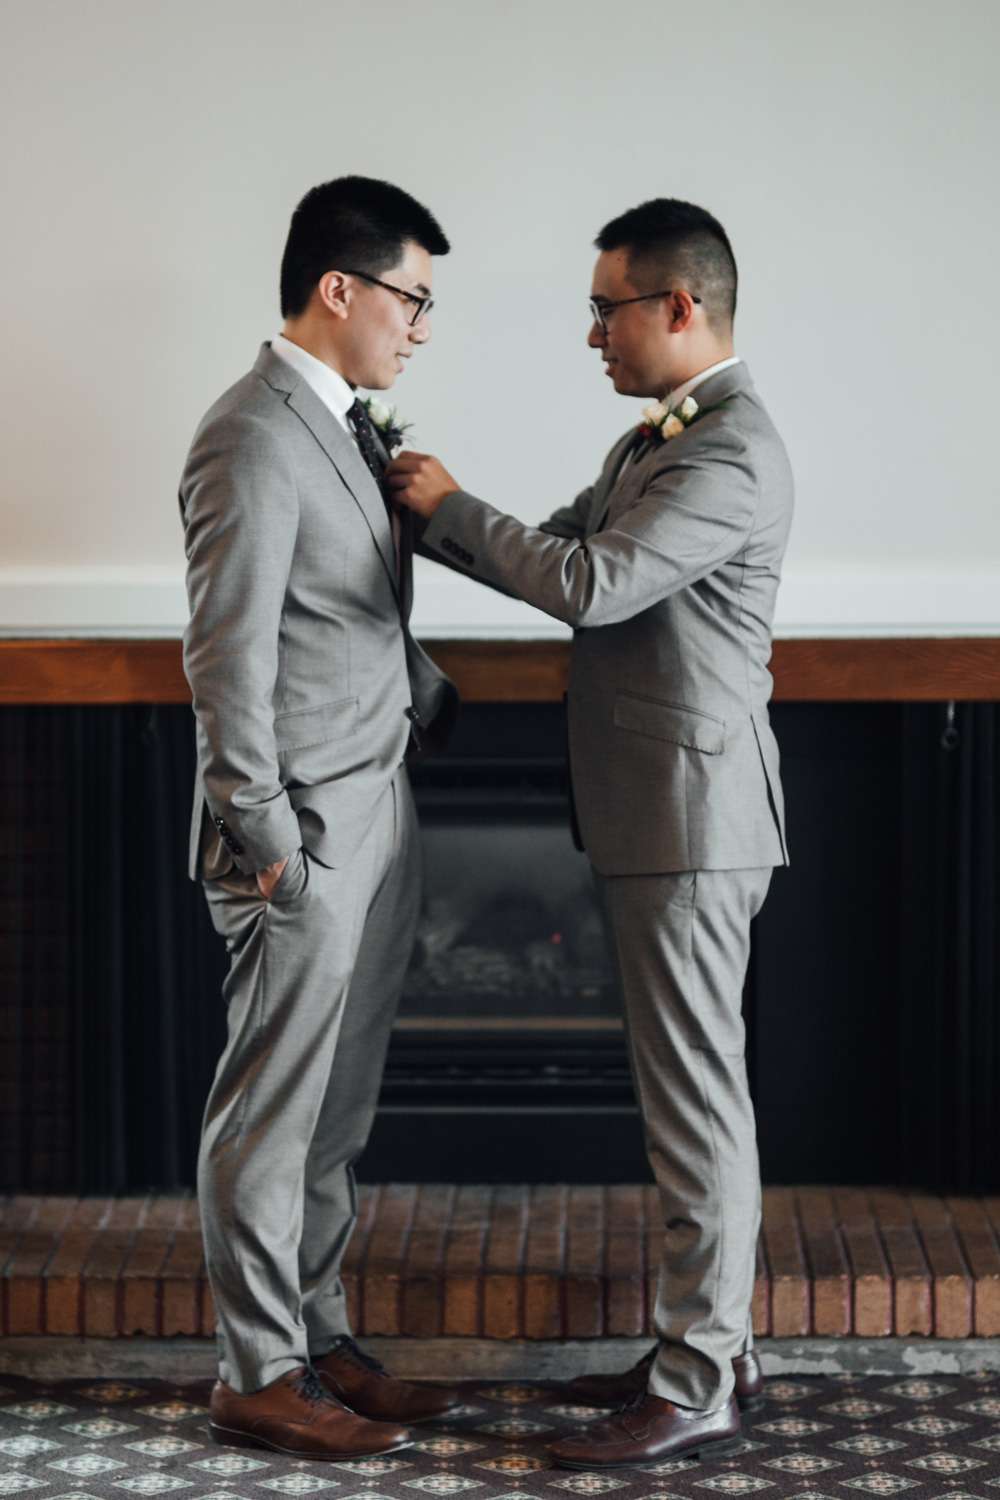 shaughnessy heights united church wedding ceremony vancouver photography